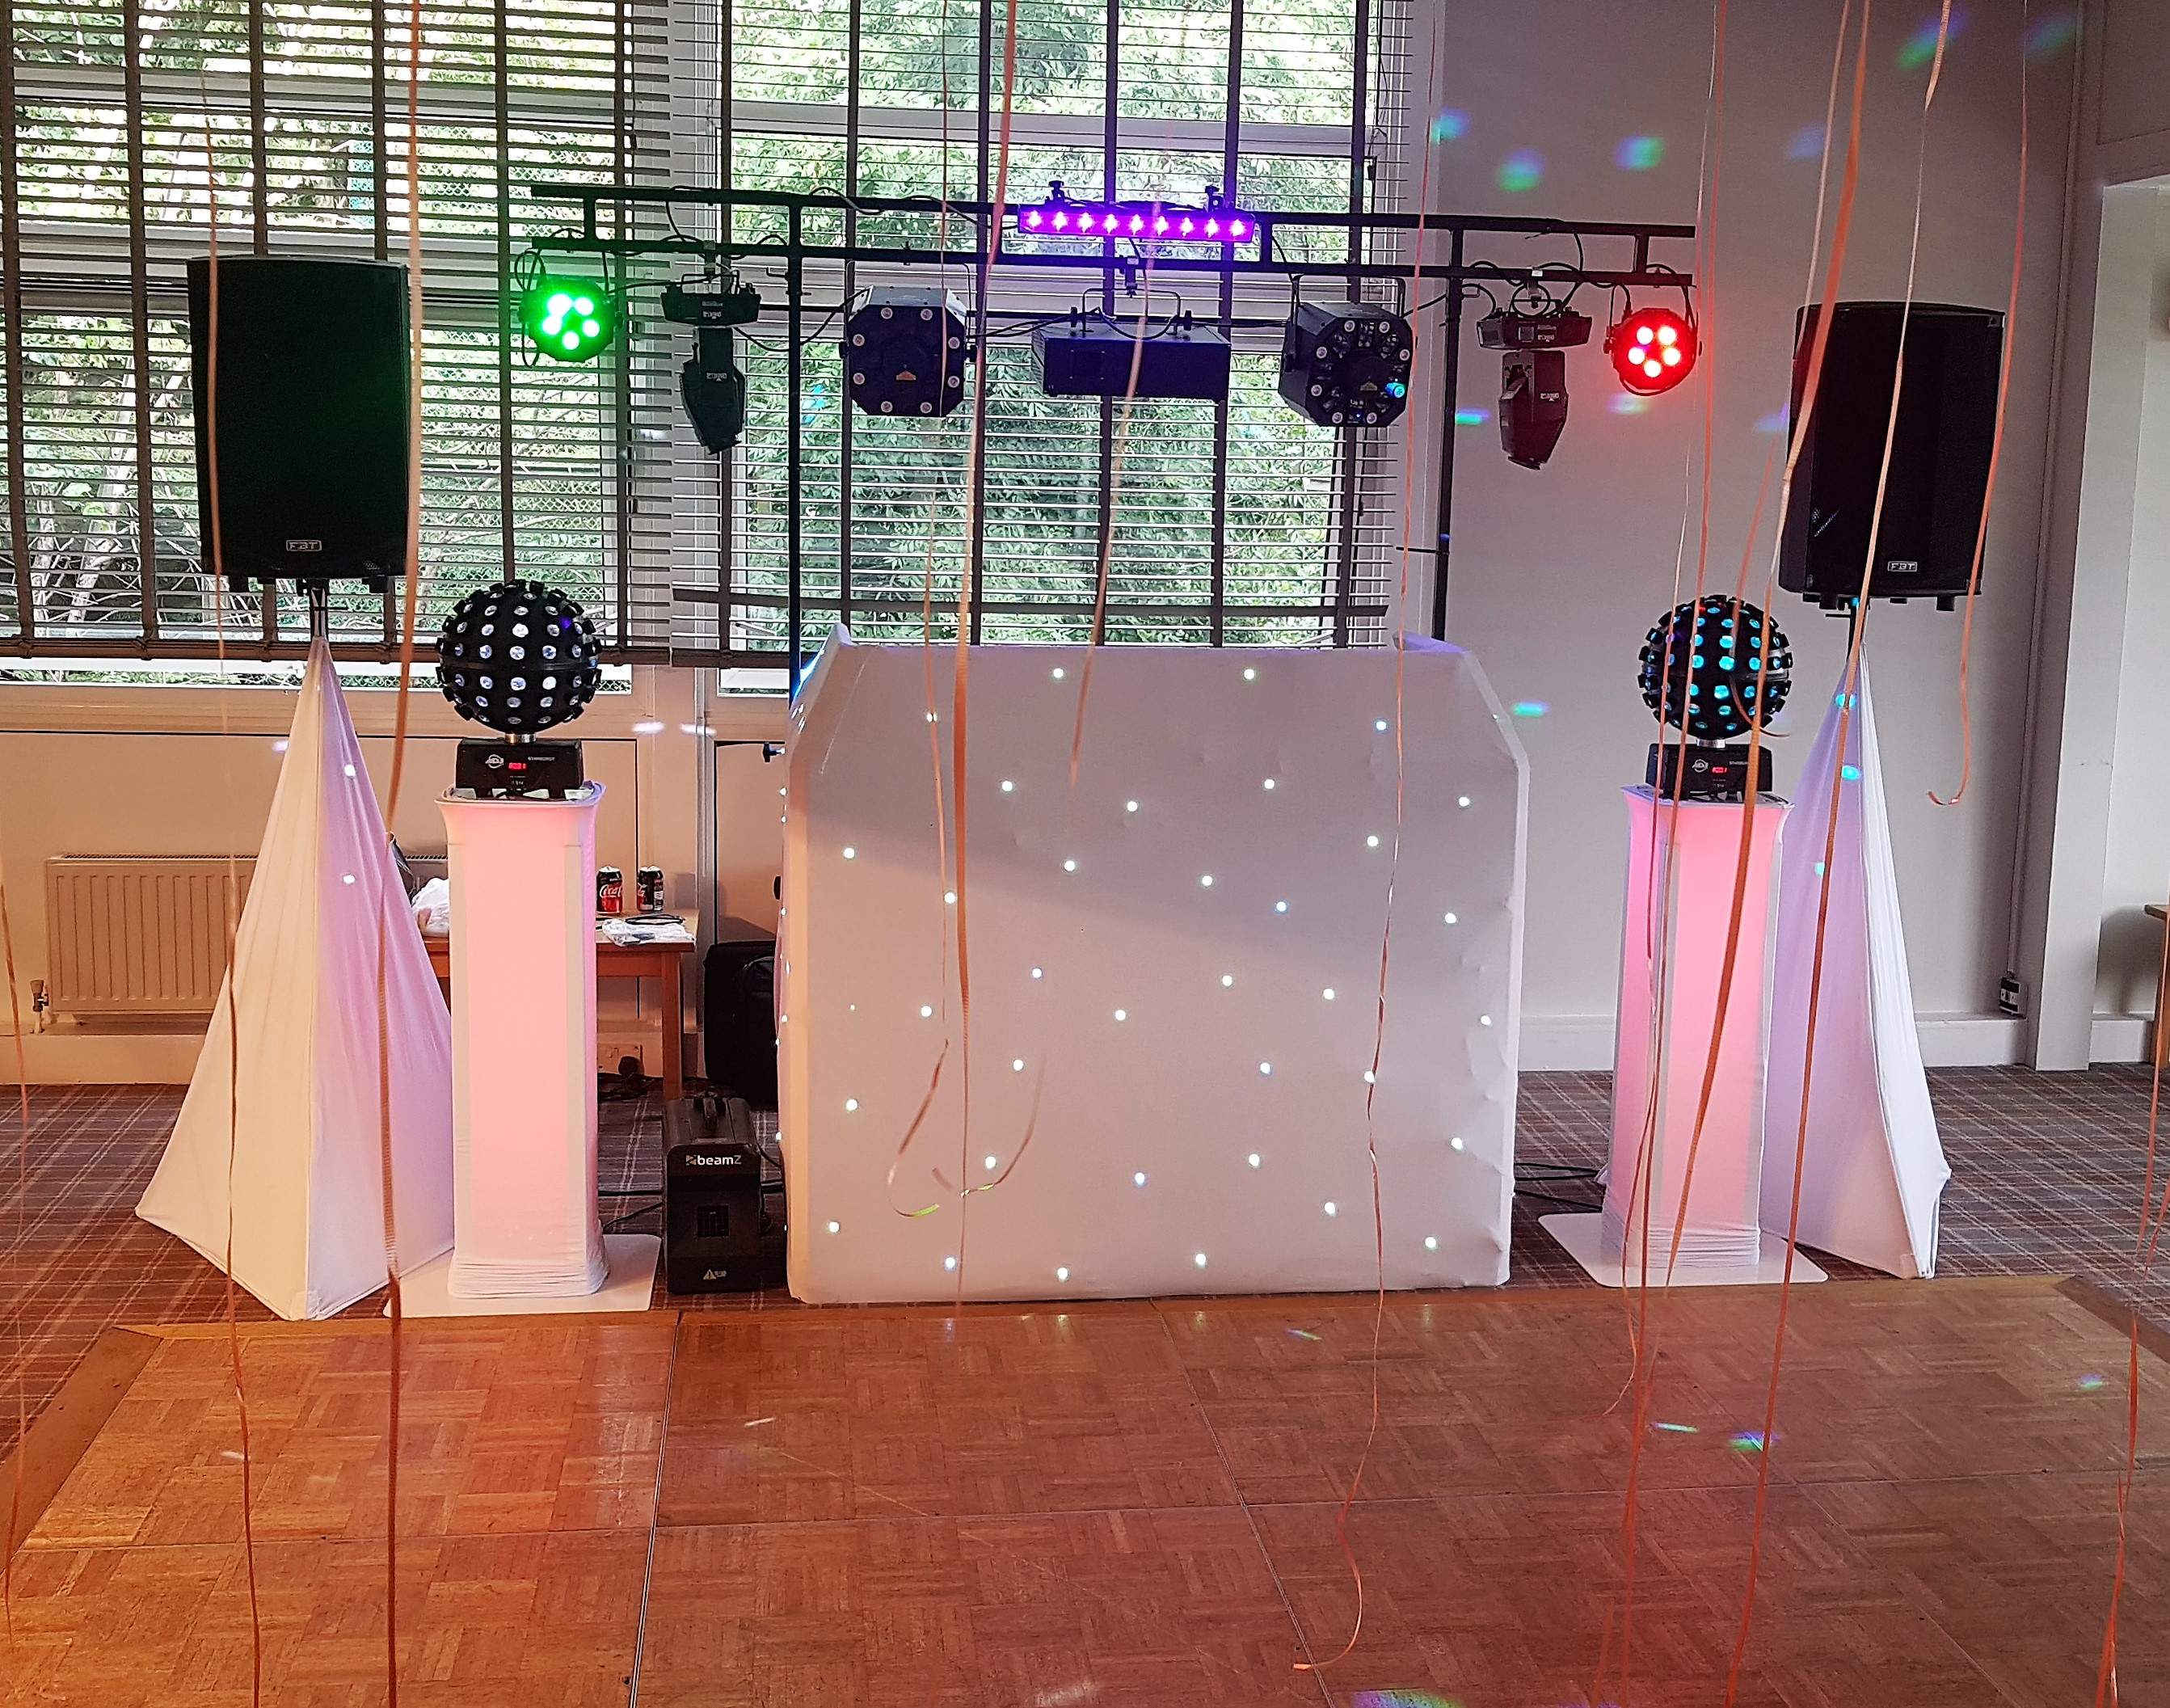 + Podiums with uplighting and Mirror ball effects.